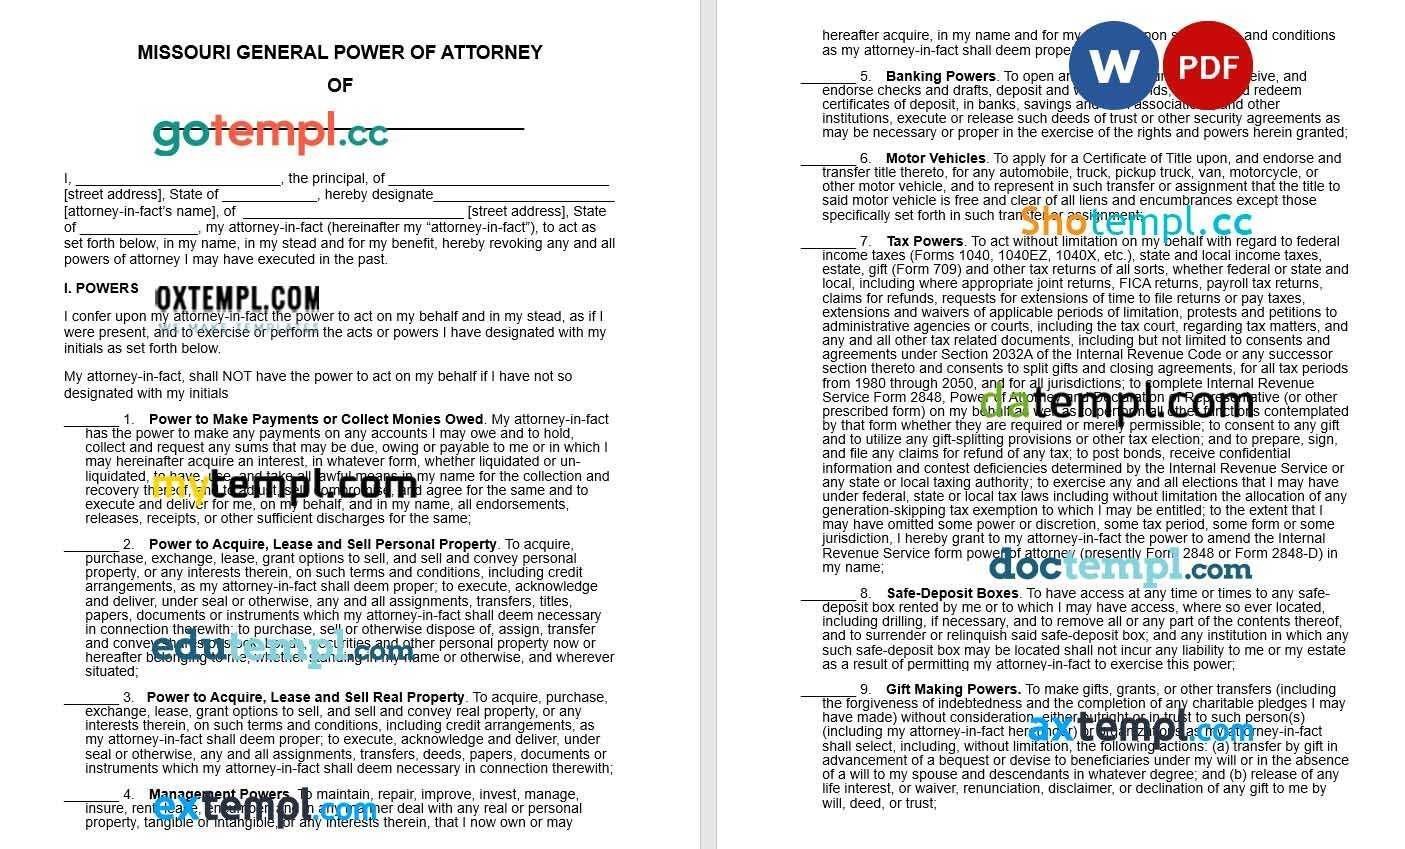 Missouri General Financial Power of Attorney Form example, fully editable